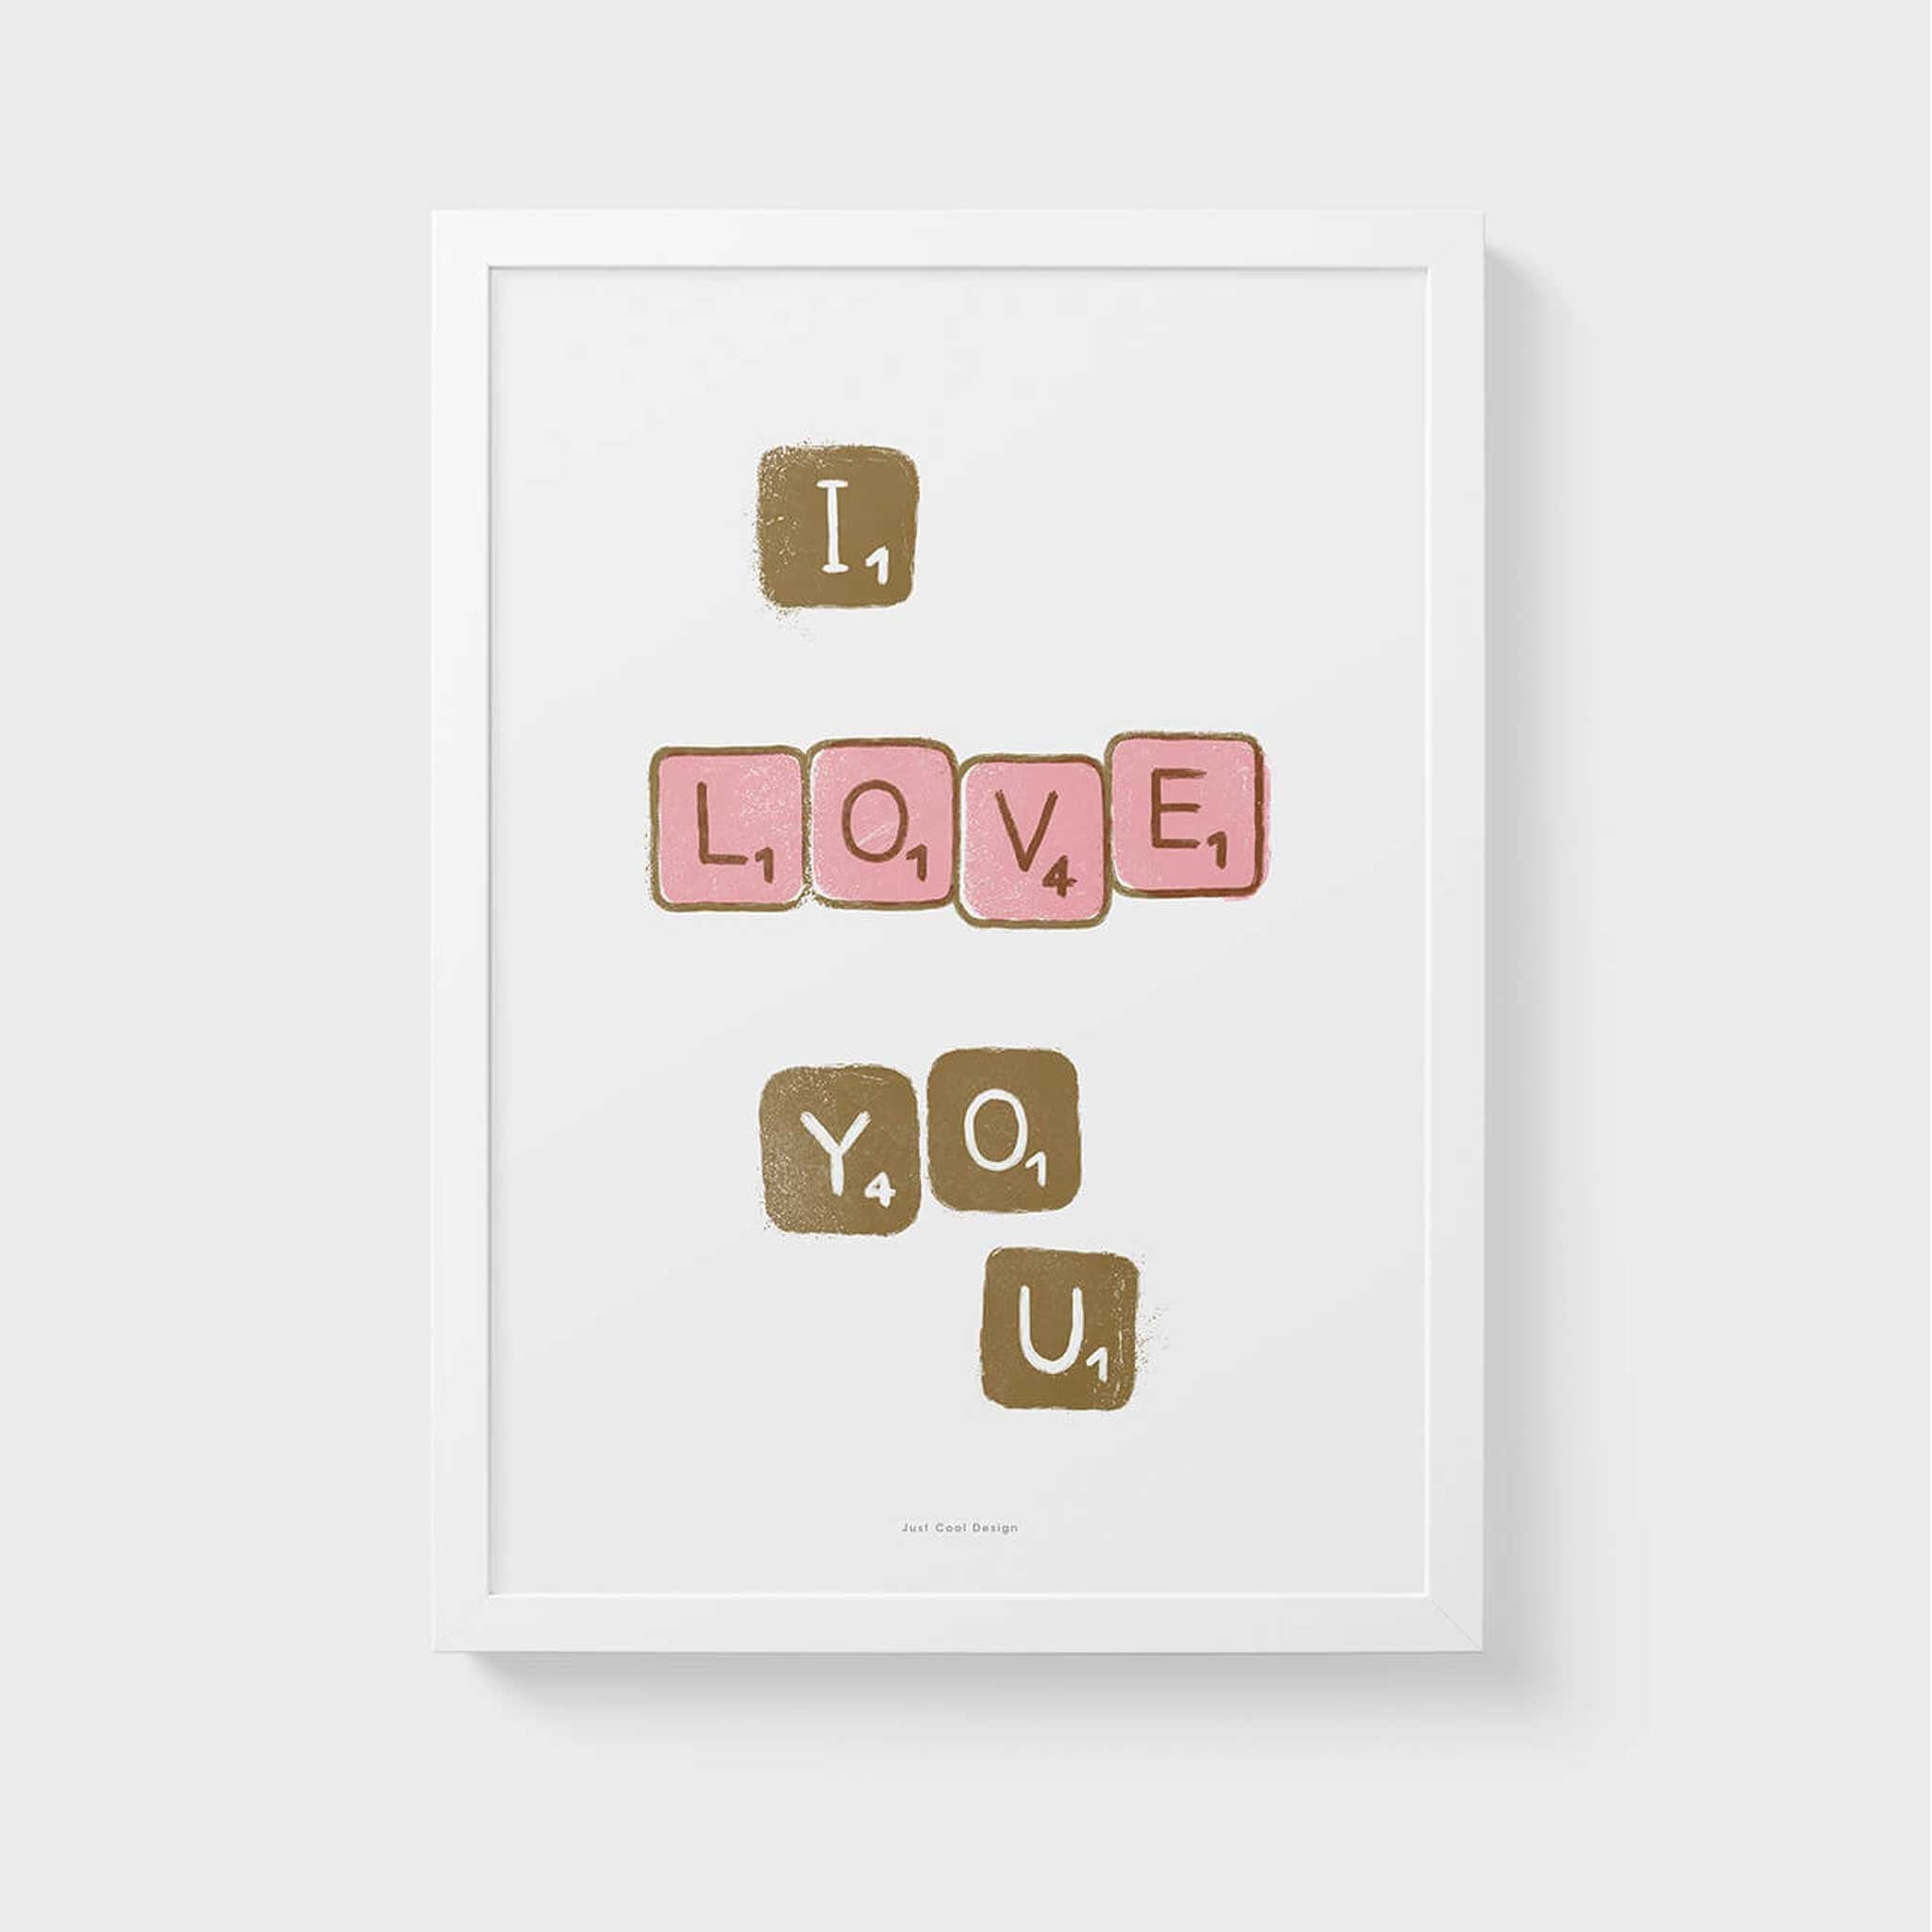 I LOVE YOU SCRABBLE | Grafik POSTER | A3 Format | Just Another Cool Design